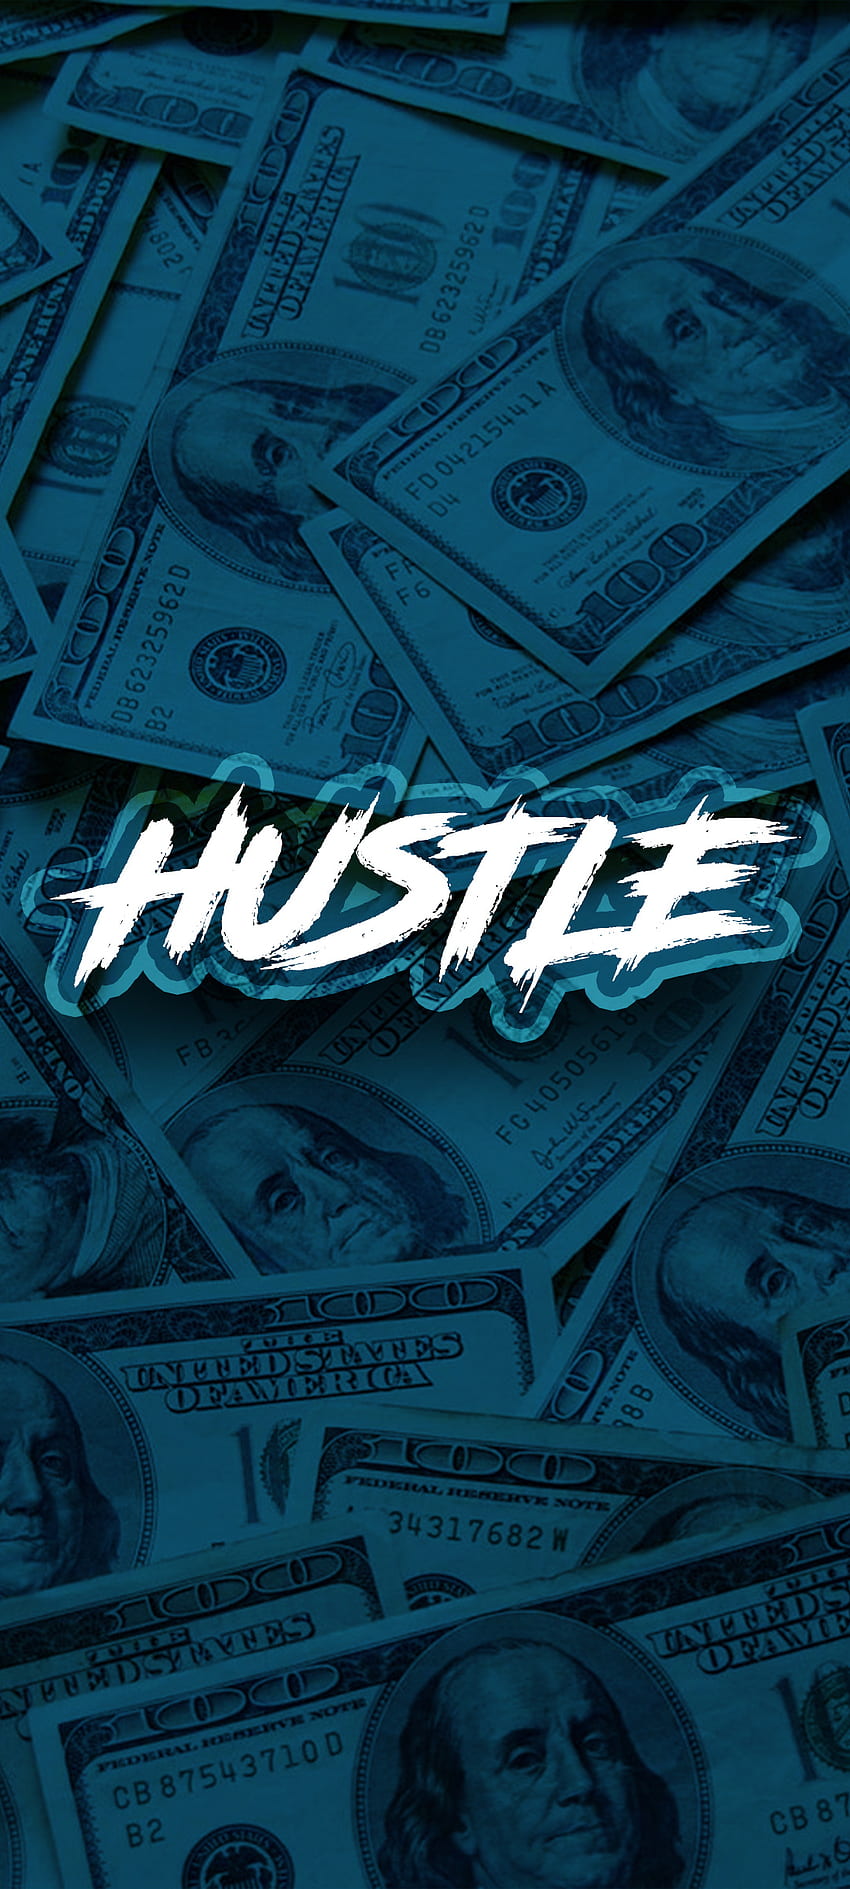 Download wallpaper 1350x2400 hustle, motivation, words, text iphone  8+/7+/6s+/6+ for parallax hd background